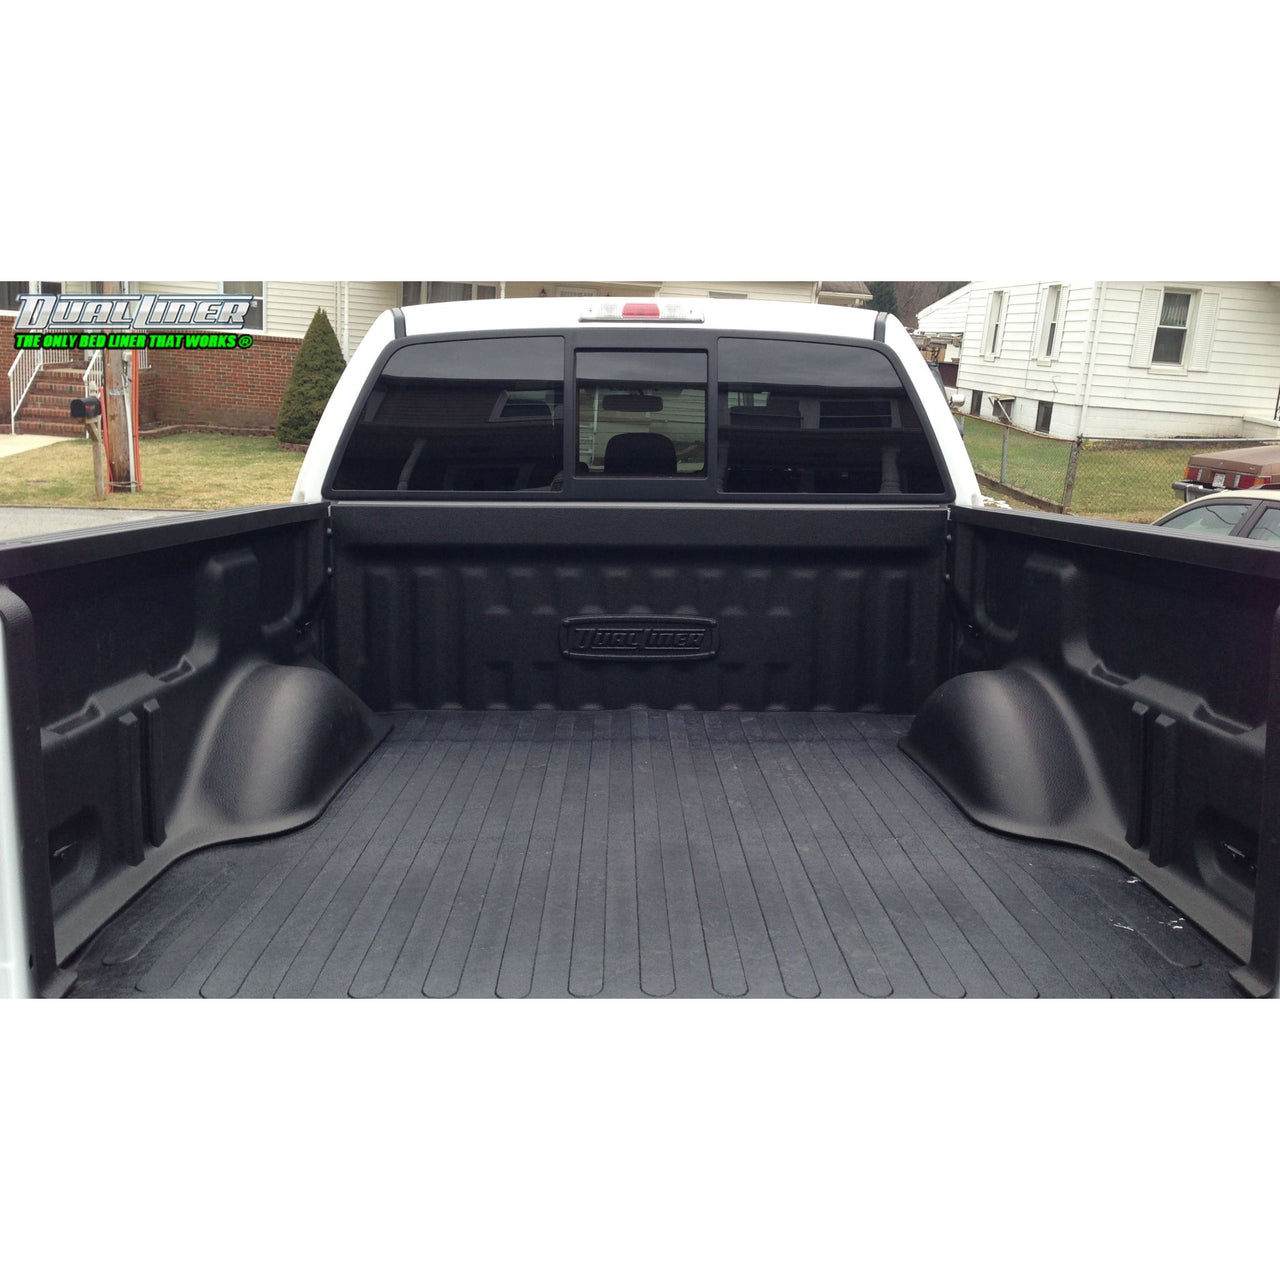 DualLiner 2021 to 2022 F-150 (WITH LED Light Bar & Tailgate Work Surface) - Short 5.5' Bed